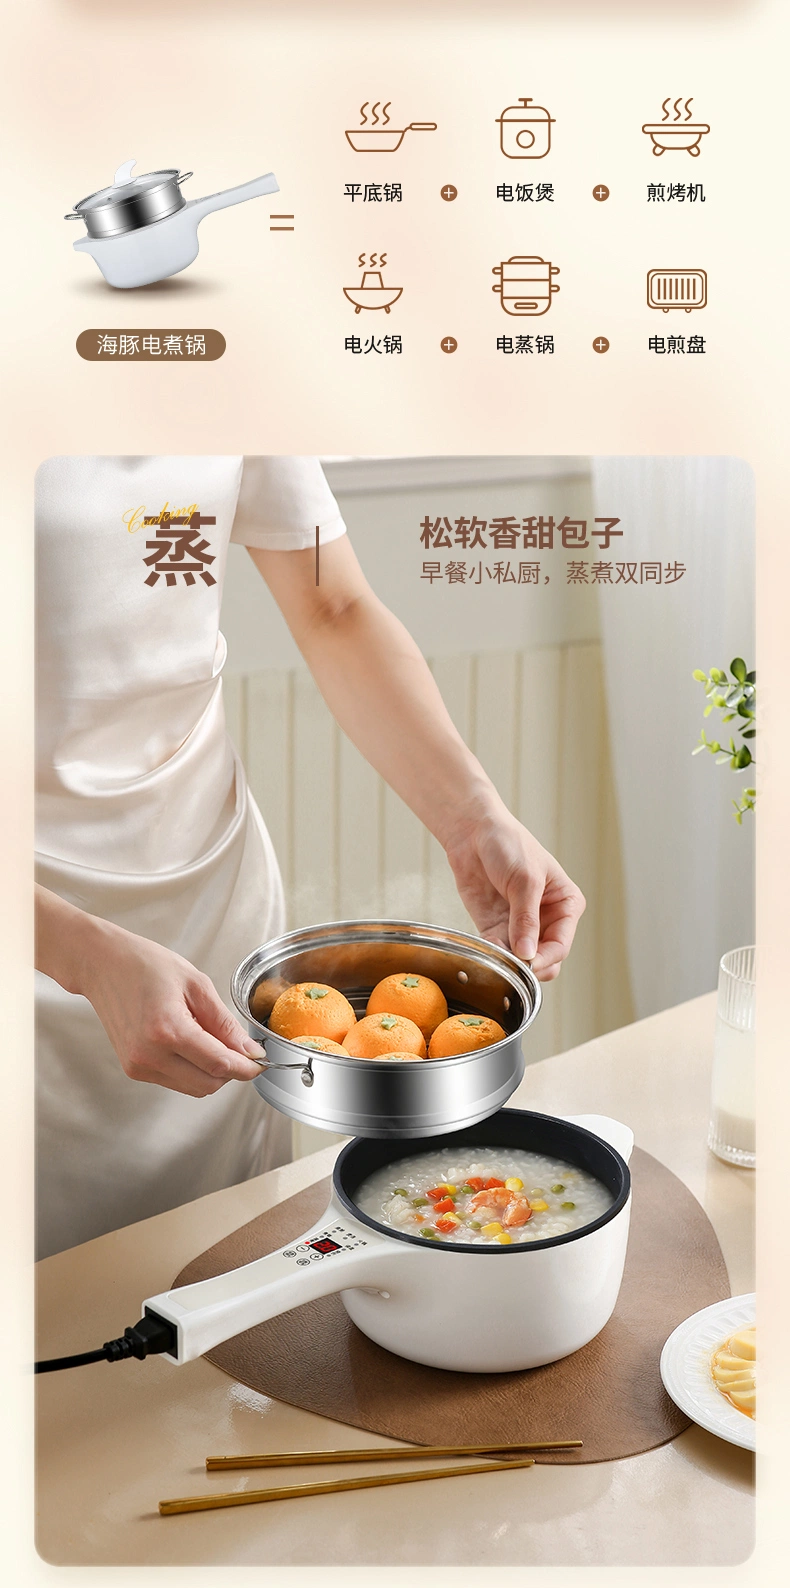 Xbc-20cm Shark Reservation Single-Layer Multifunctional Electric Cooking Pan Electric Frying Pan